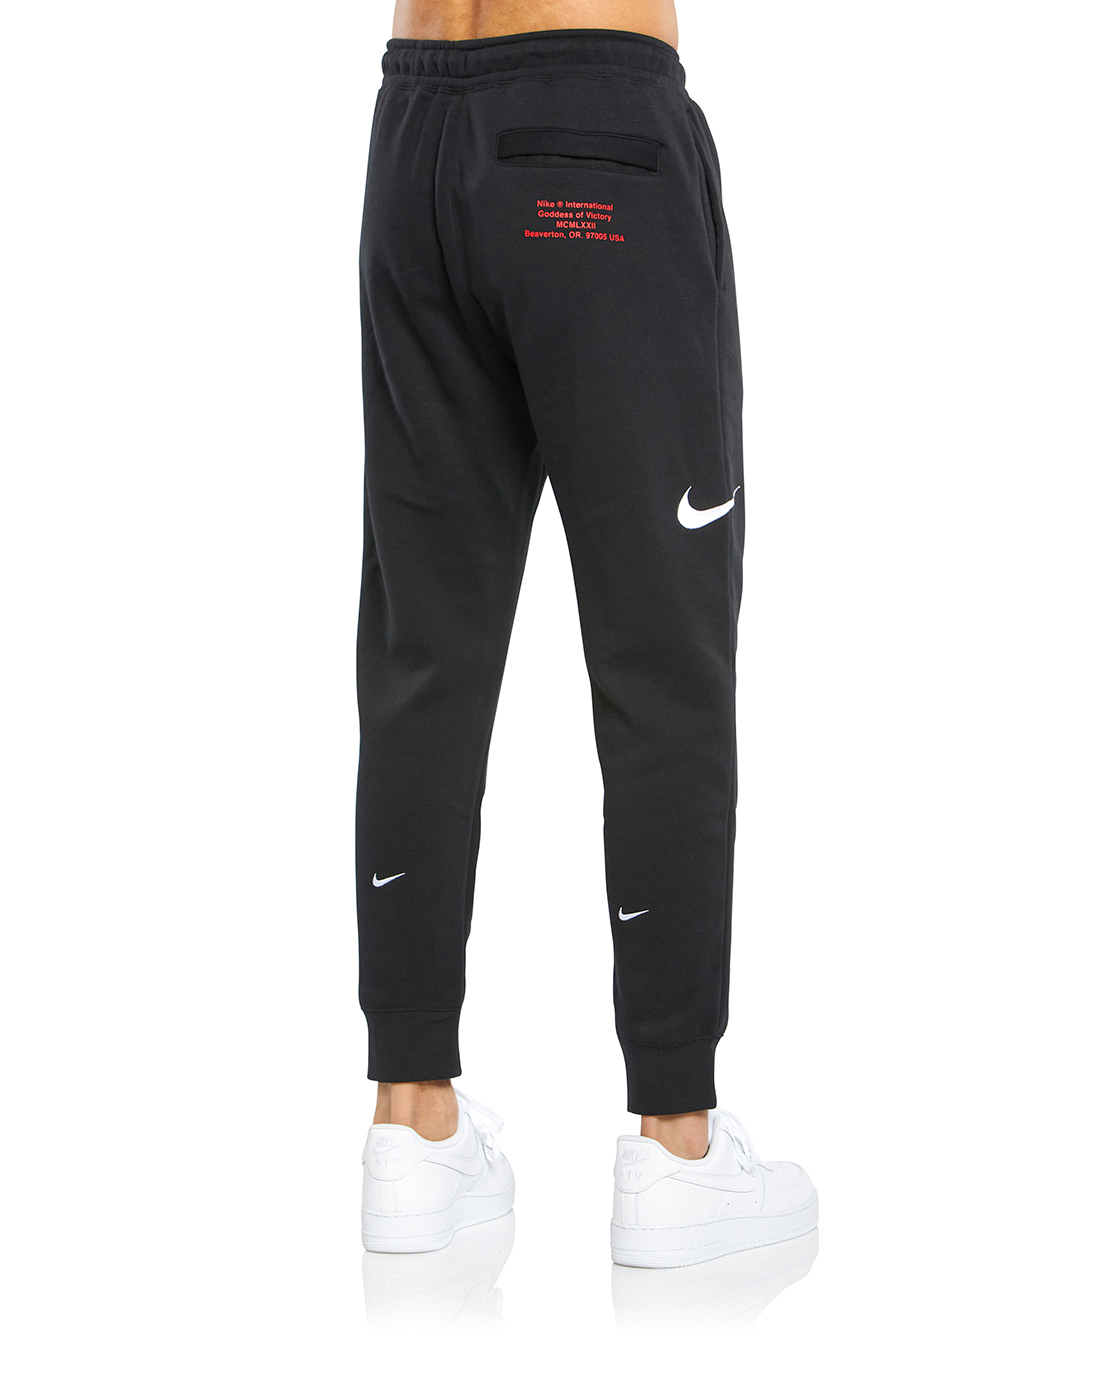 nike pants with swoosh down the side